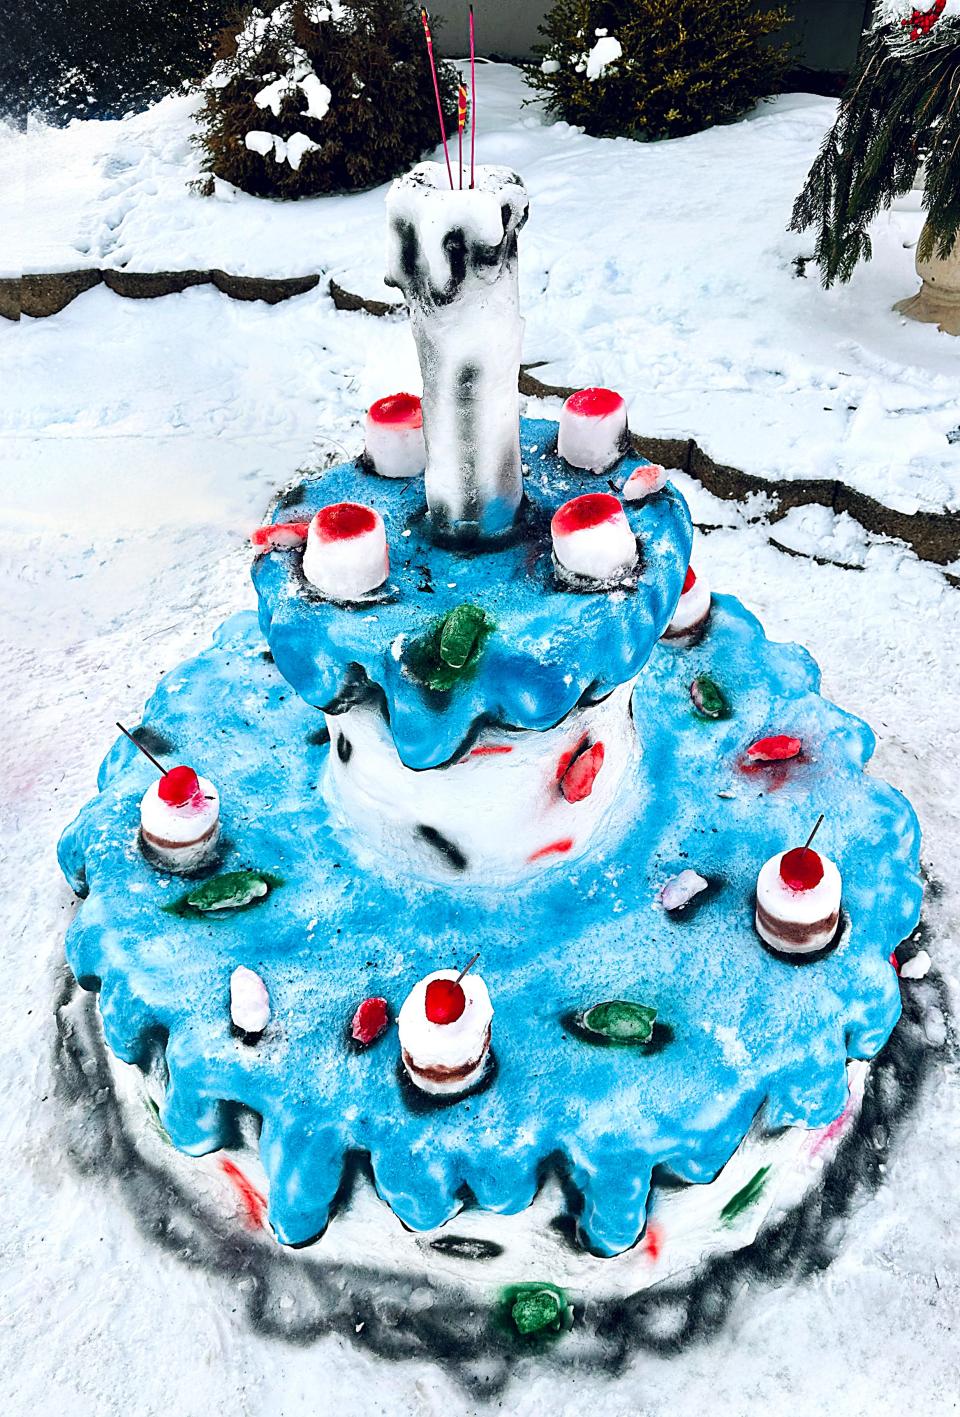 Now that's a birthday cake to behold, although maybe not to eat. Iveta Buck of Canandaigua makes snow artworks every winter.